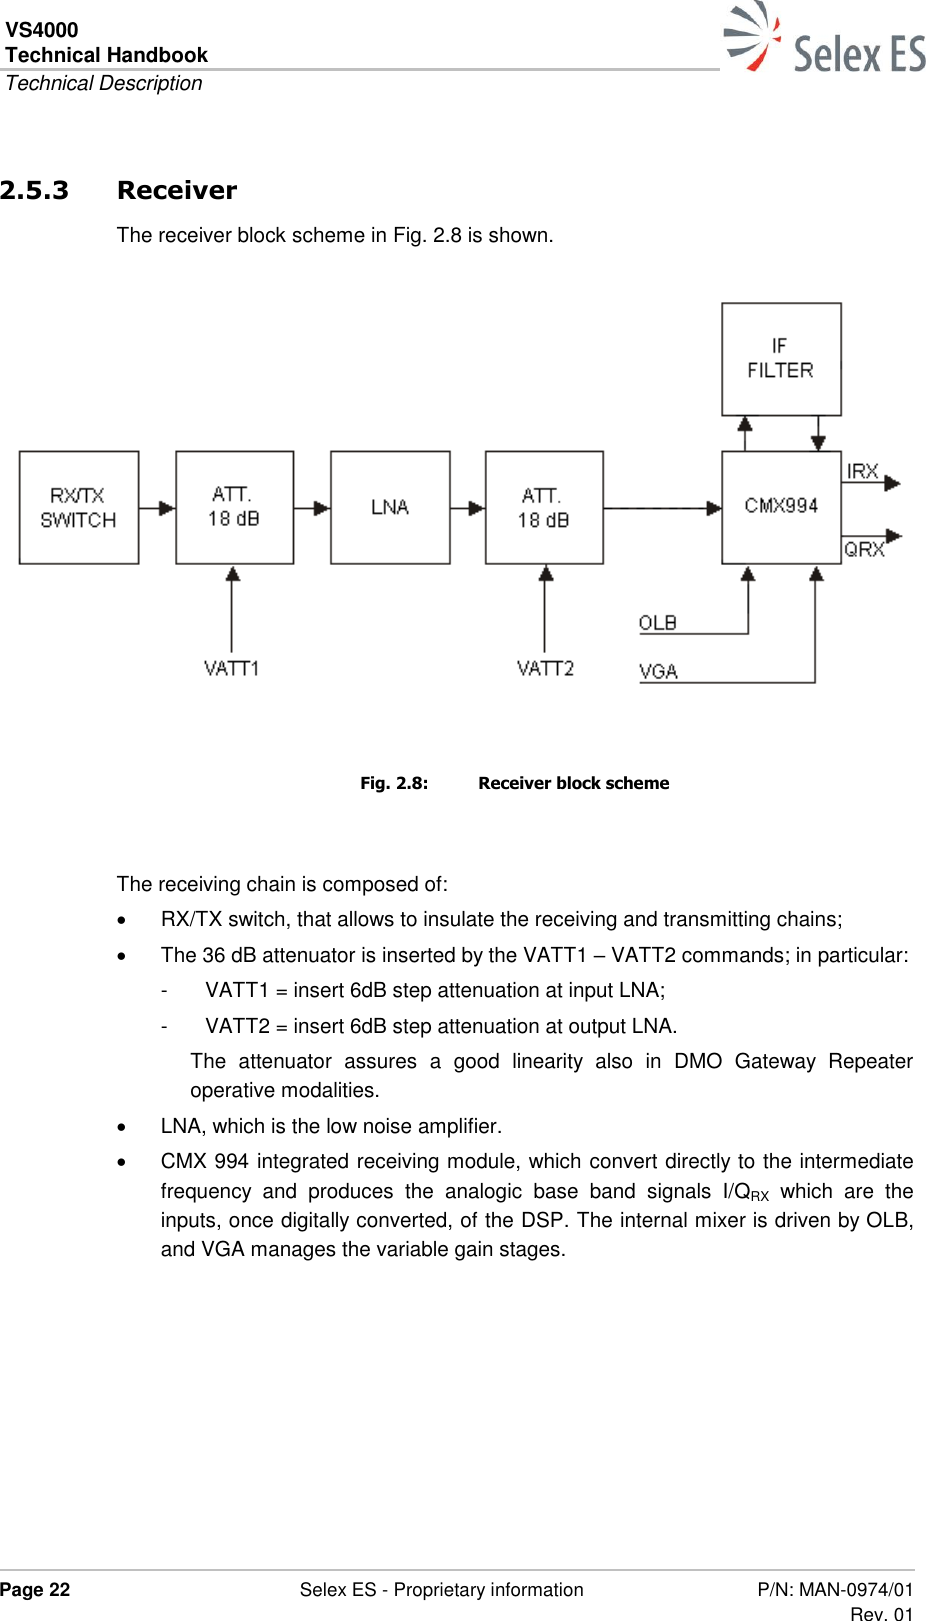 VS4000 Technical Handbook  Technical Description  Page 22  Selex ES - Proprietary information P/N: MAN-0974/01 Rev. 01  2.5.3 Receiver The receiver block scheme in Fig. 2.8 is shown.    Fig. 2.8:  Receiver block scheme  The receiving chain is composed of:   RX/TX switch, that allows to insulate the receiving and transmitting chains;   The 36 dB attenuator is inserted by the VATT1 – VATT2 commands; in particular: -  VATT1 = insert 6dB step attenuation at input LNA; -  VATT2 = insert 6dB step attenuation at output LNA. The  attenuator  assures  a  good  linearity  also  in  DMO  Gateway  Repeater operative modalities.   LNA, which is the low noise amplifier.   CMX 994 integrated receiving module, which convert directly to the intermediate frequency  and  produces  the  analogic  base  band  signals  I/QRX  which  are  the inputs, once digitally converted, of the DSP. The internal mixer is driven by OLB, and VGA manages the variable gain stages.  